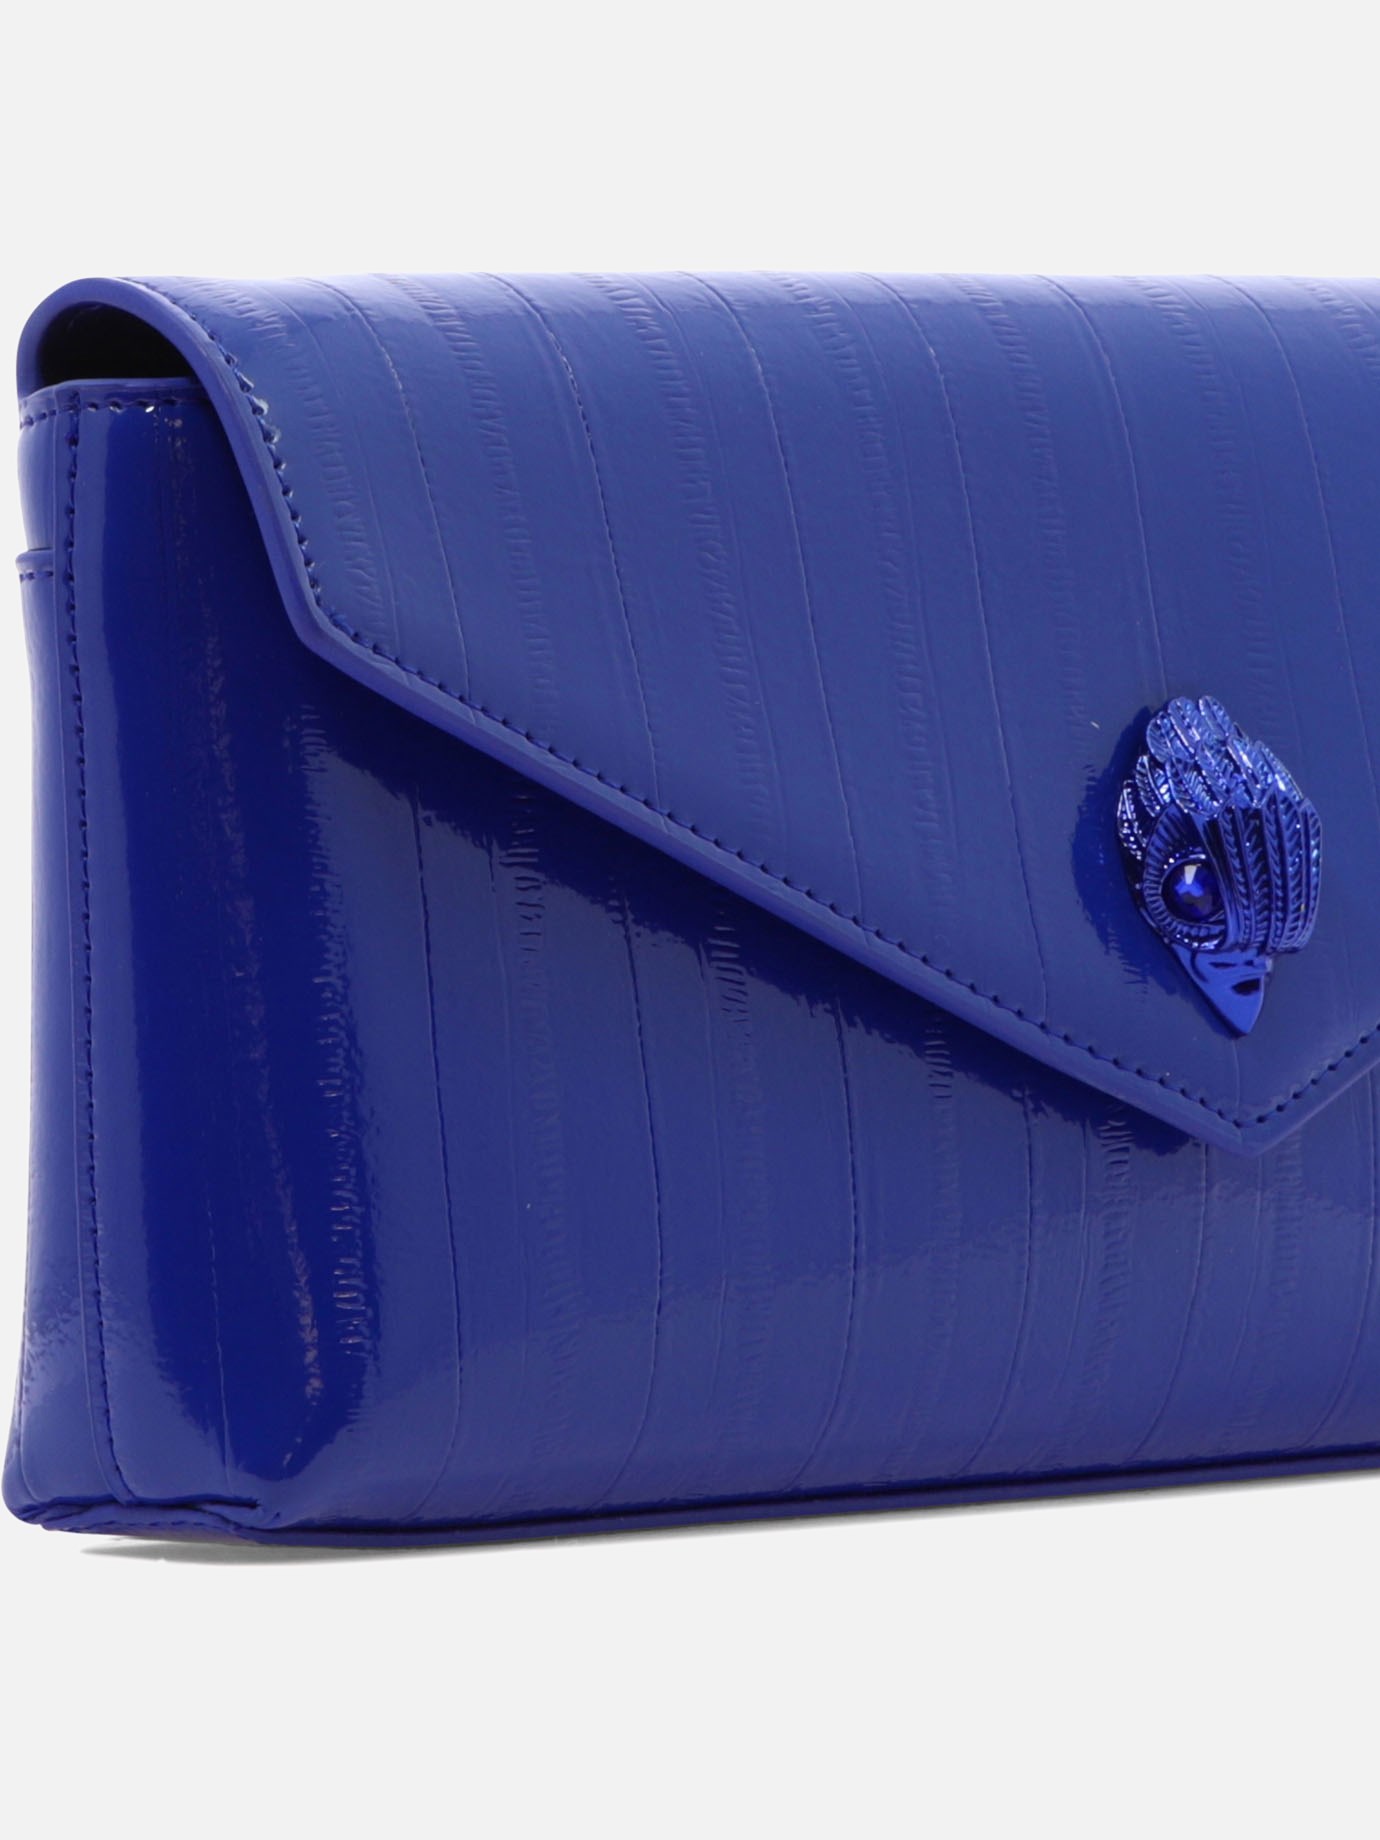 2022A/W新作送料無料 カートジェイガーロンドン レディース クラッチバッグ バッグ Shoreditch Envelope clutch bag  80 BLUE actualidaddeportiva.com.ar